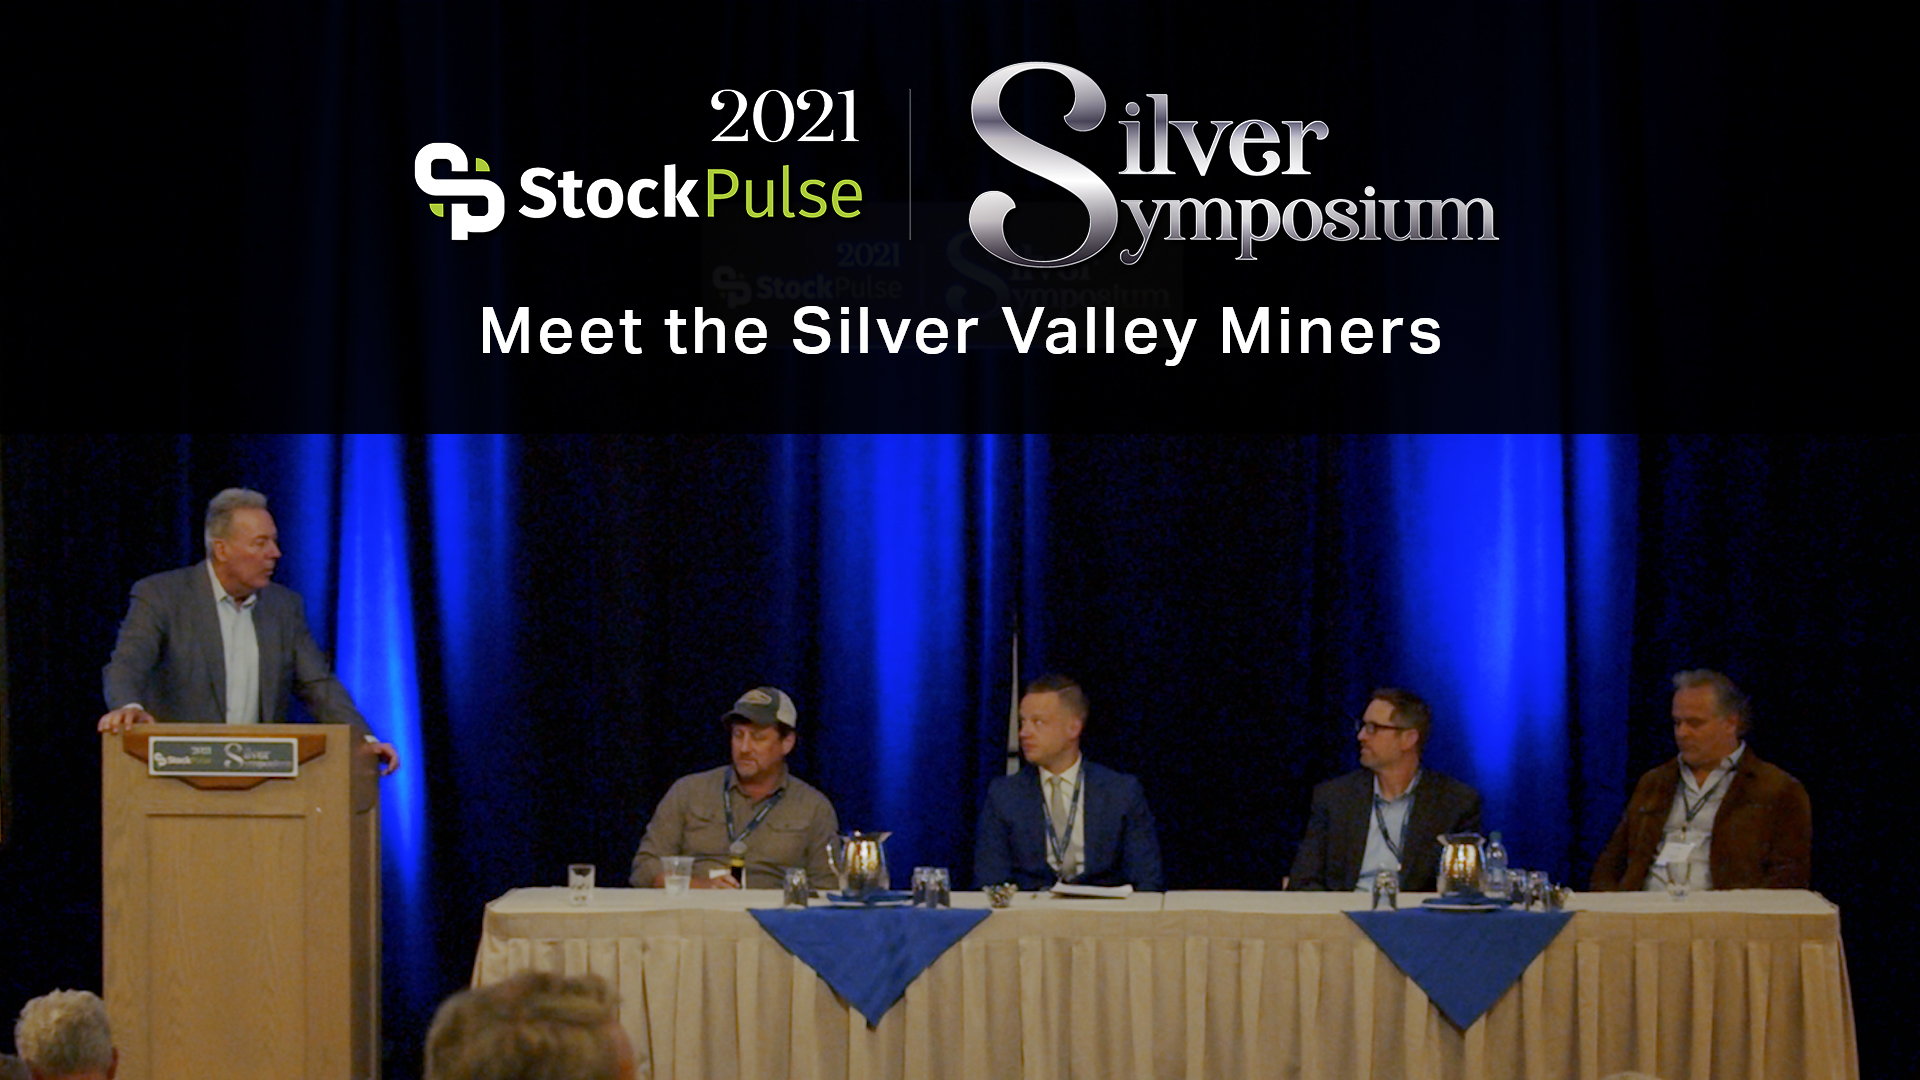 Panel: Meet the Silver Valley Miners with David Morgan